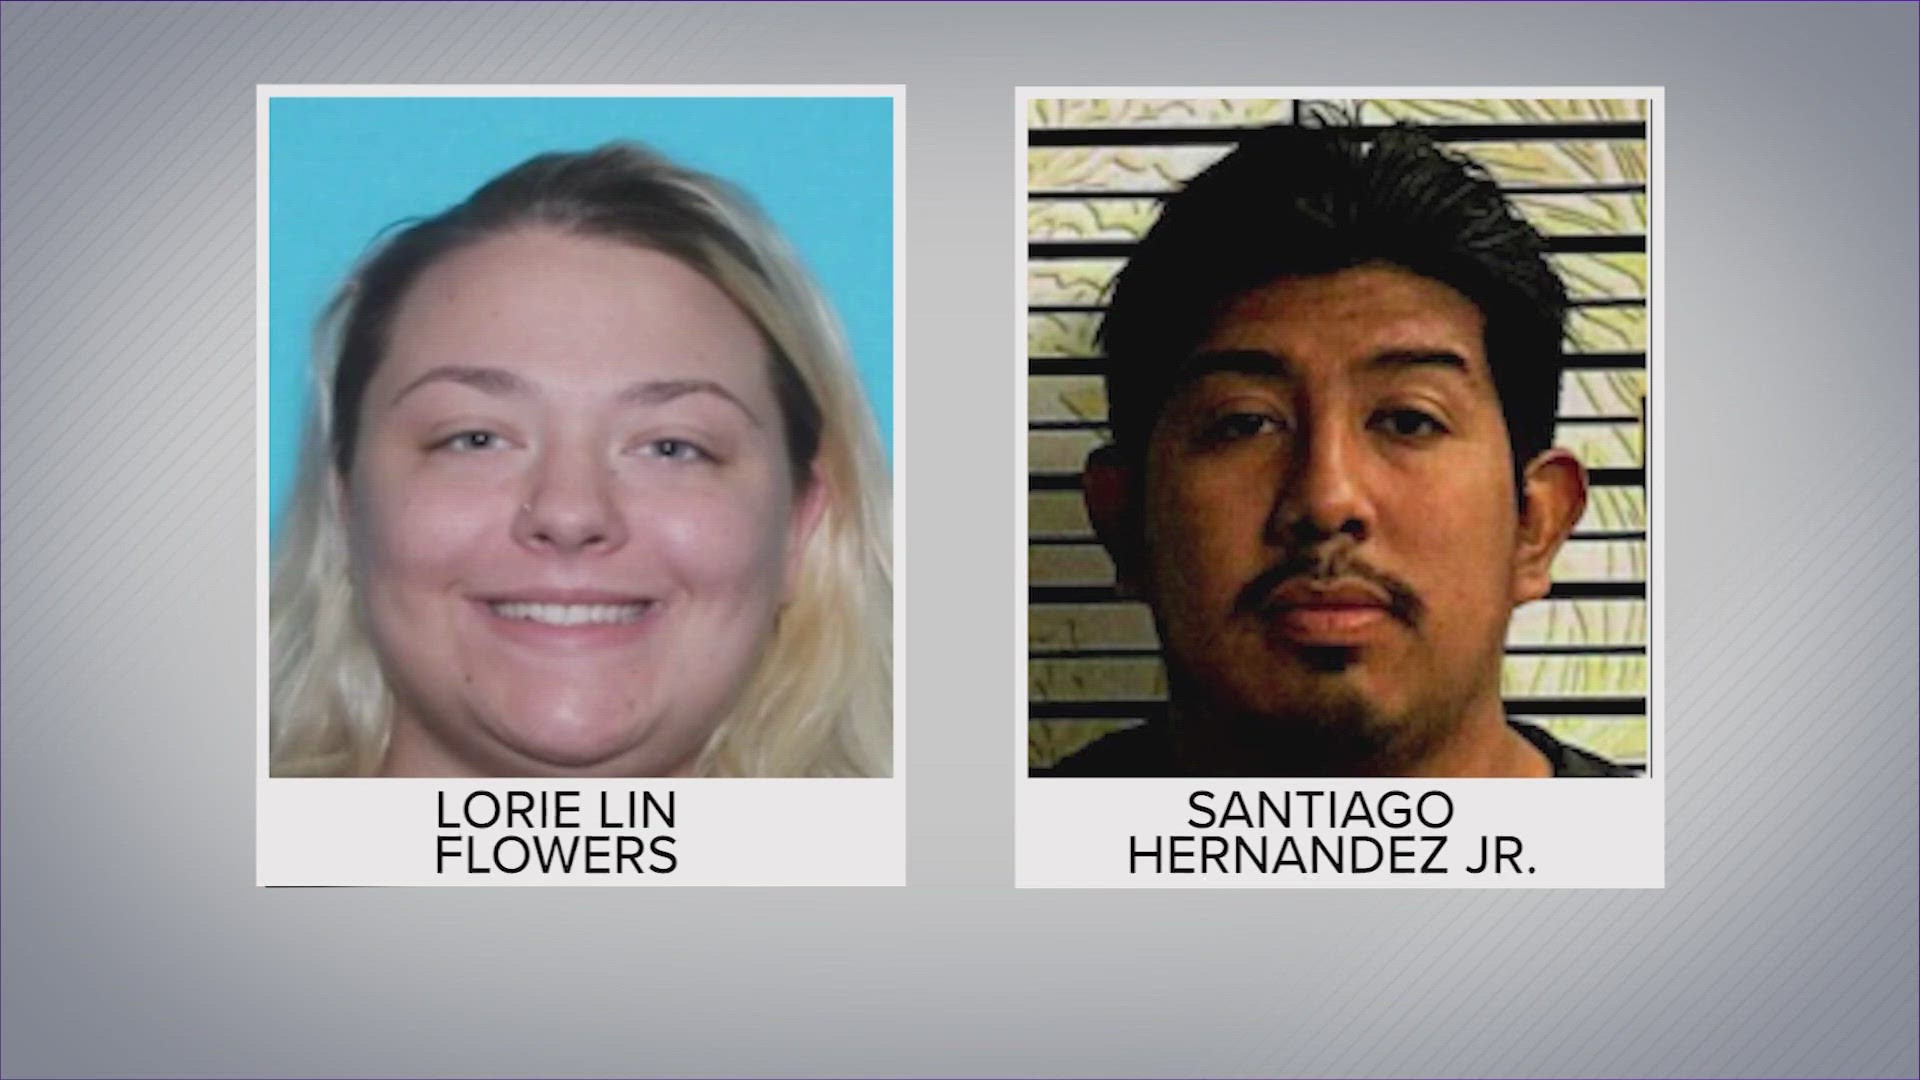 Santiago Hernandez Jr., 26, and Lorie Lin Flowers, 25, both from Houston, are believed to be together and are considered armed and dangerous.